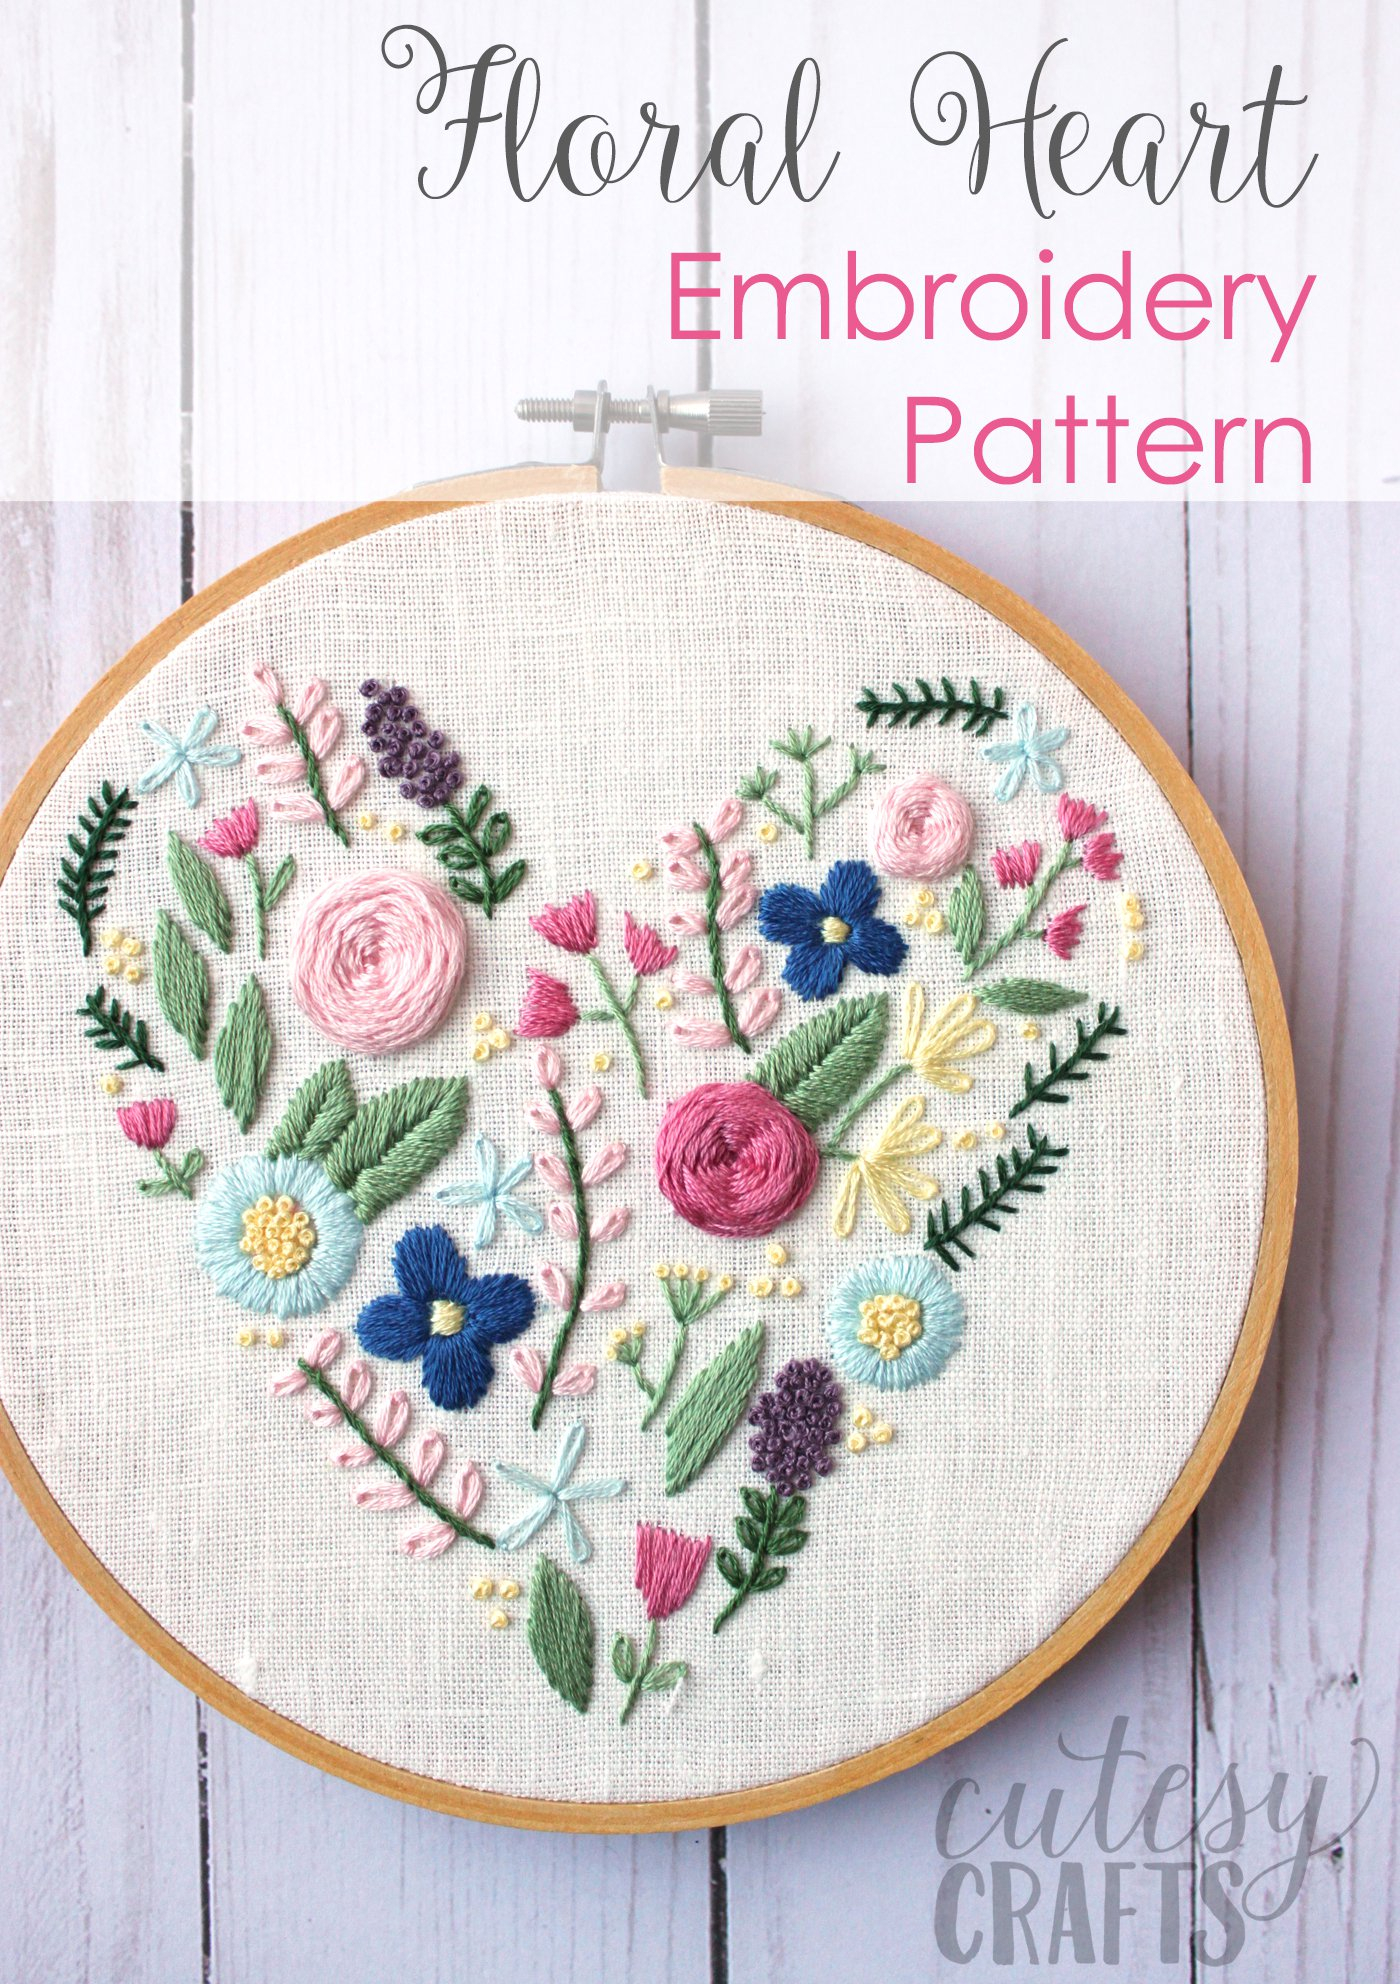 Free Embroidery Designs Patterns Floral Heart Hand Embroidery Pattern The Polka Dot Chair